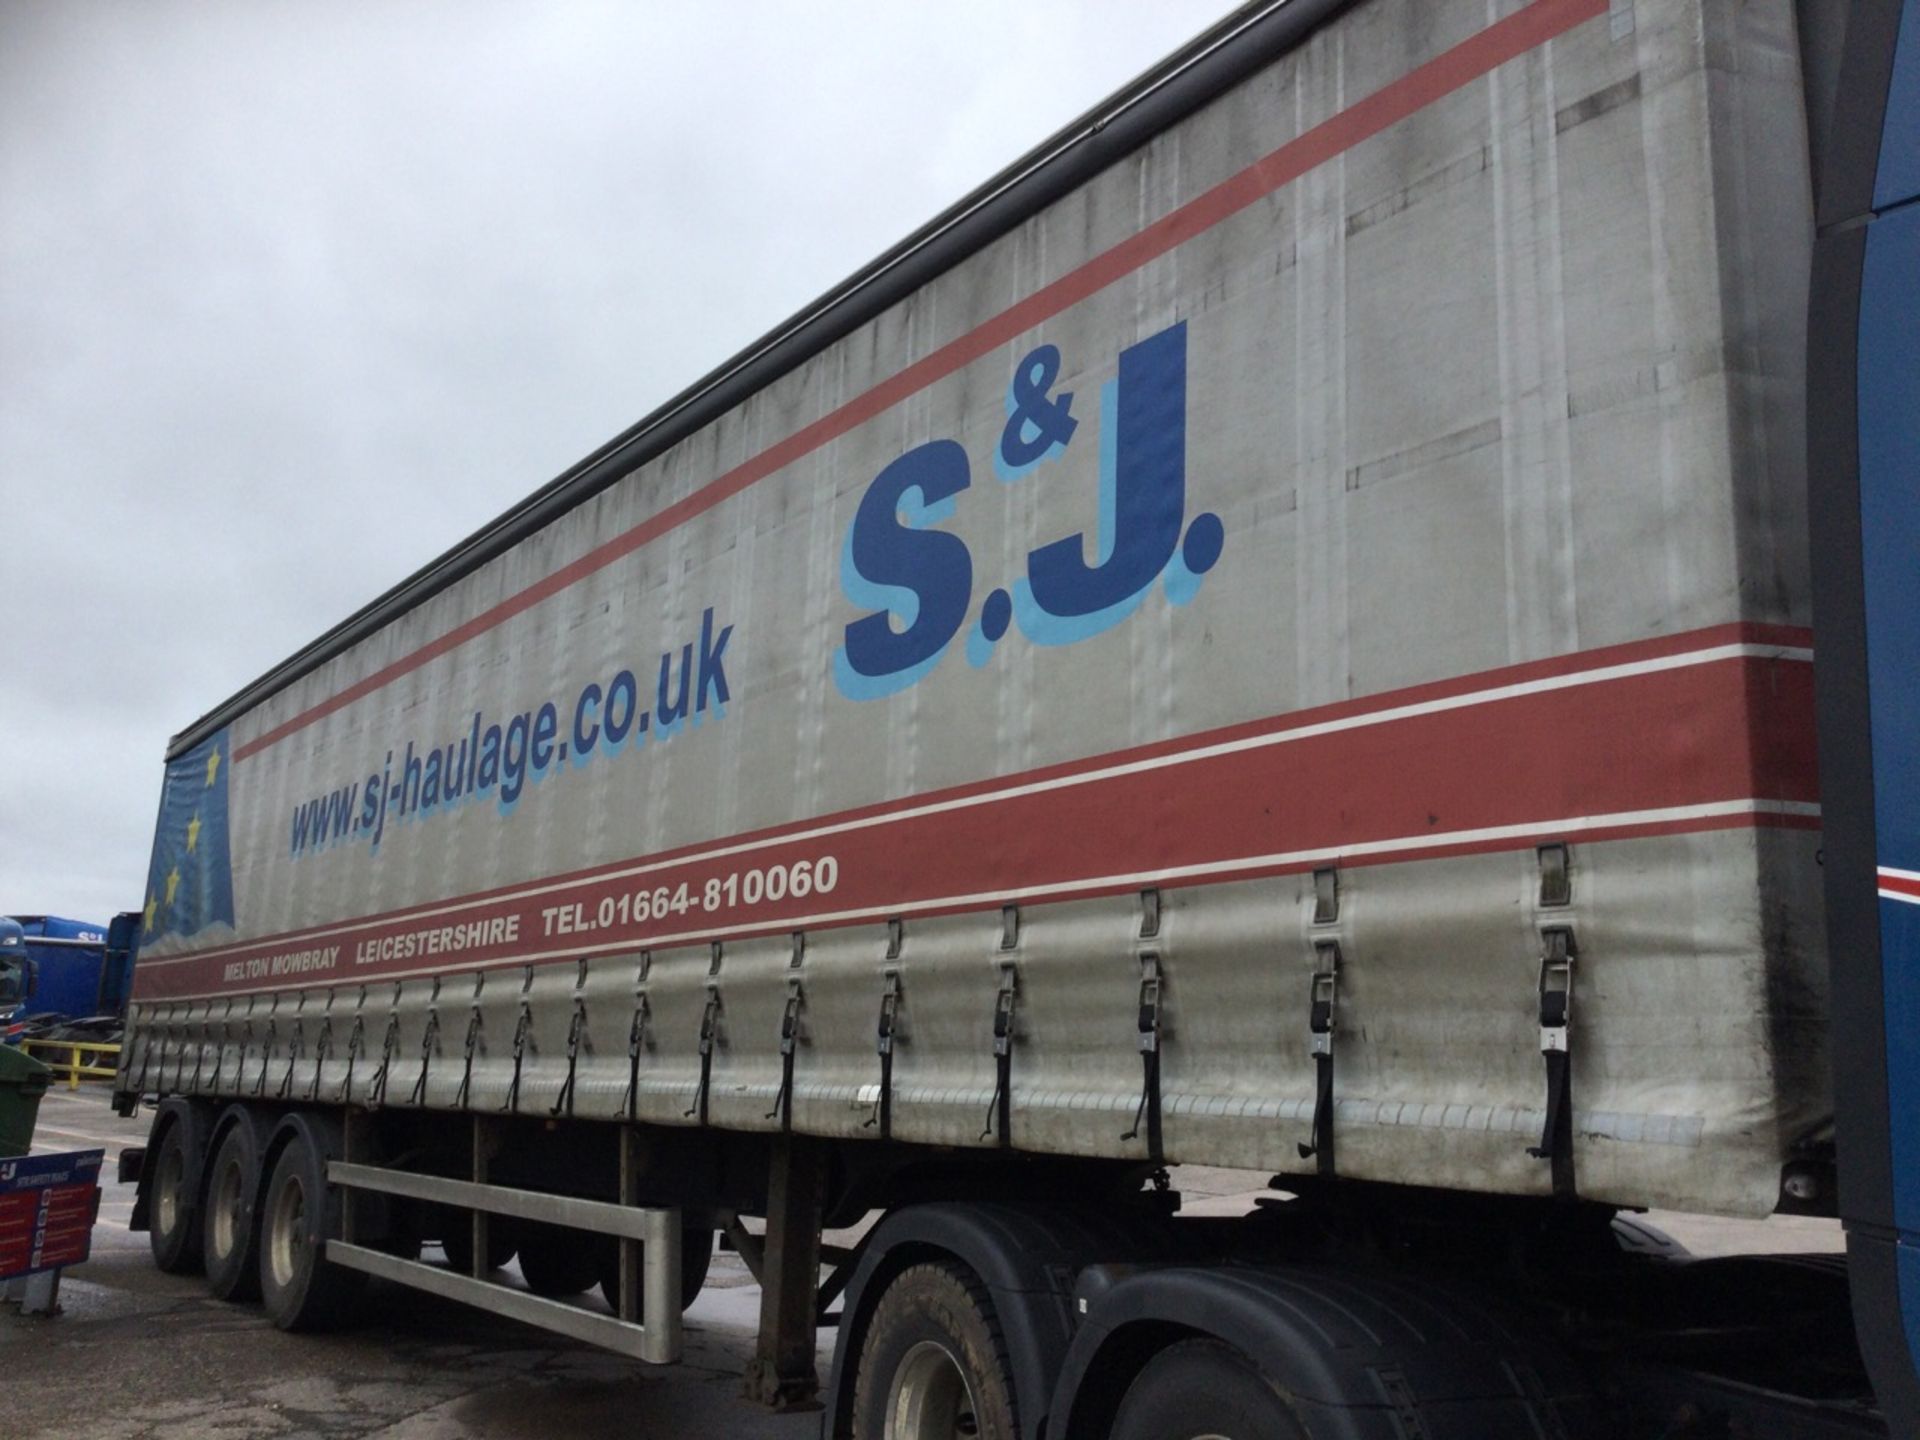 Cartwright Tri-Axle 13.6mtr Curtainside Trailer With Air Suspension Test Until 30/11/2024, serial nu